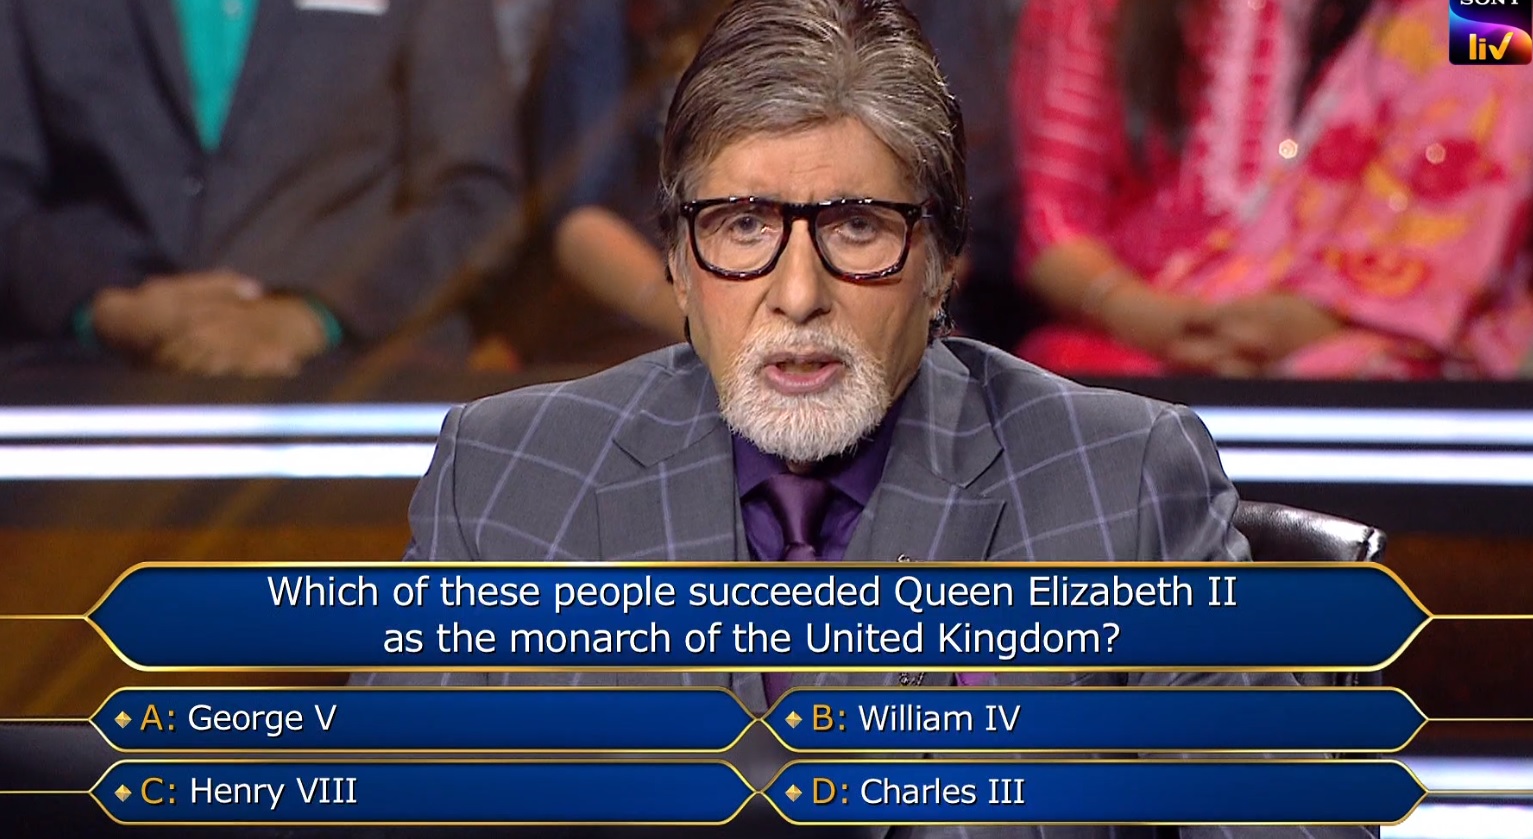 4th KBC Golden Week Ques : Which of these people succeeded Queen Elizabeth II as the monarch of the United Kingdom?